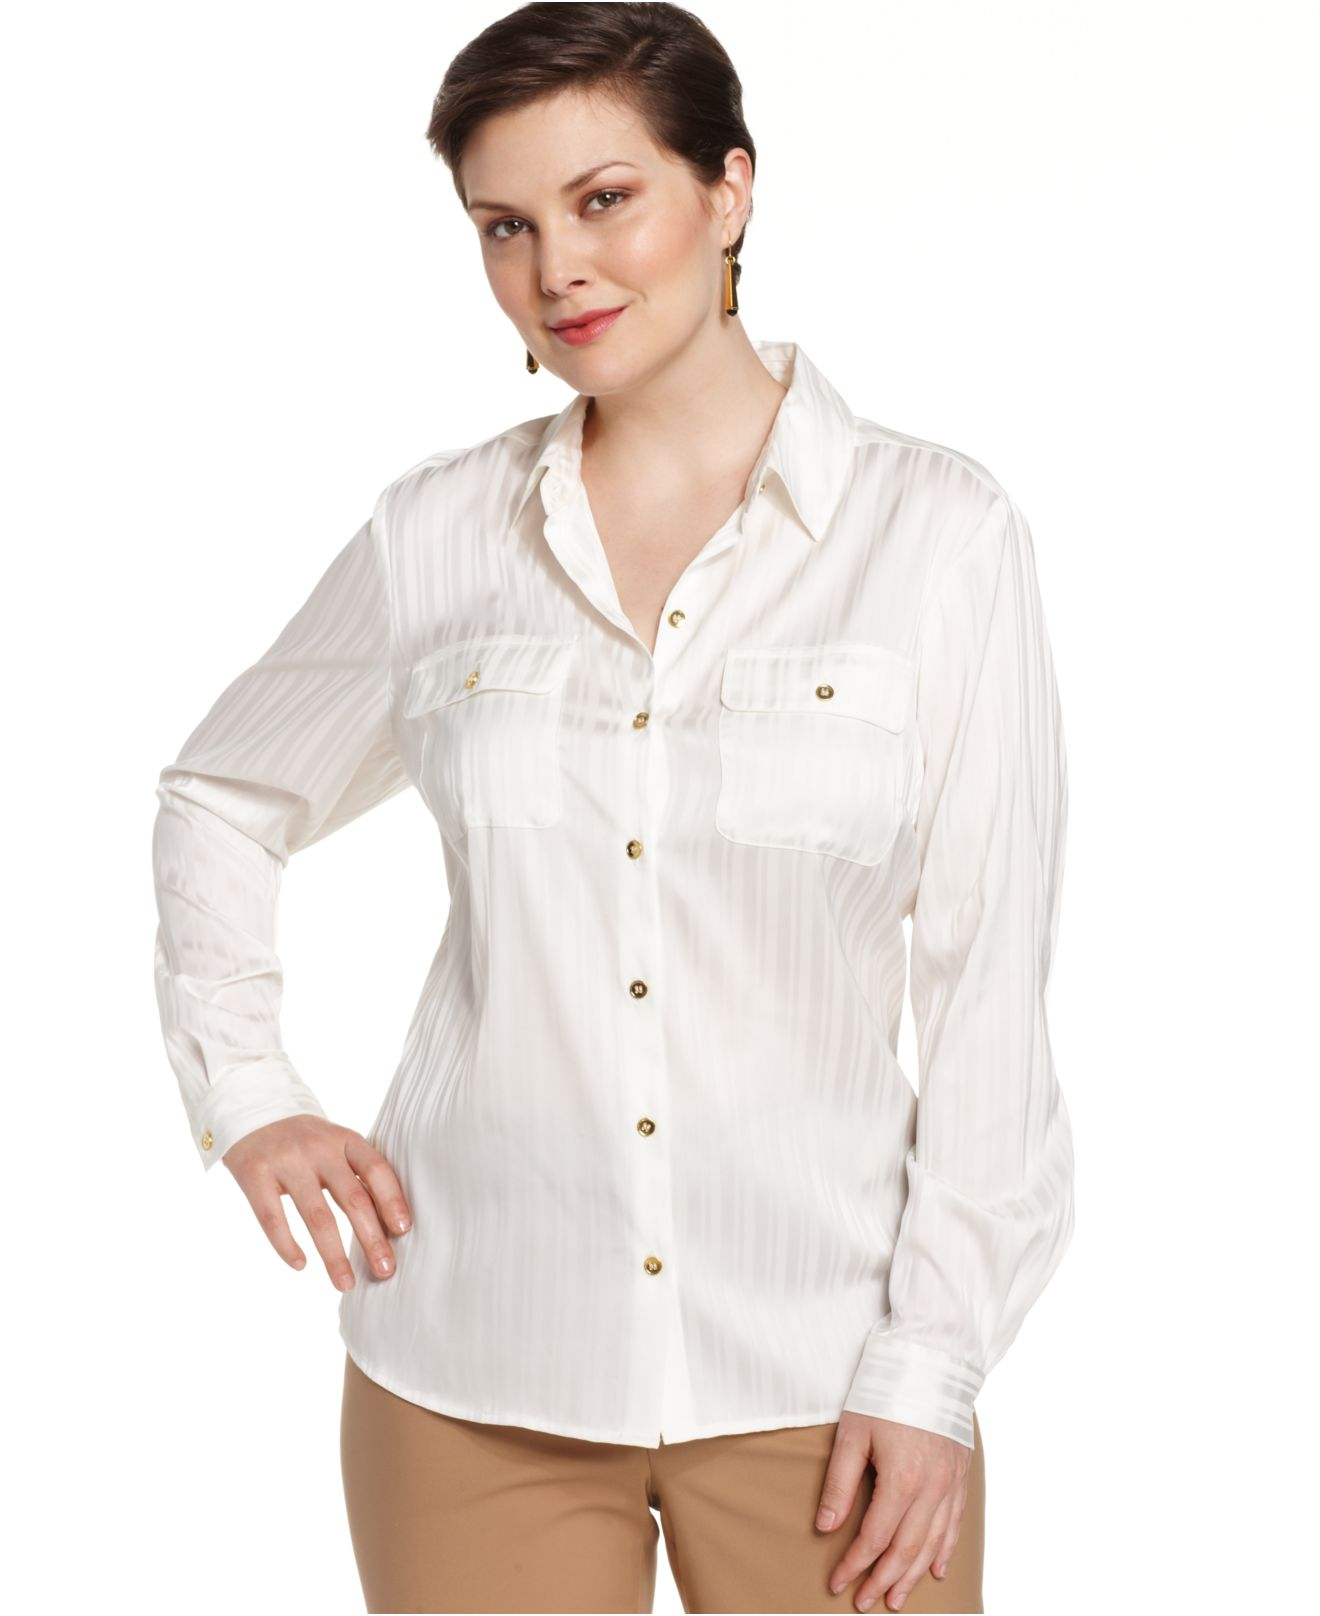 Lyst - Jones New York Collection Plus Size Striped Utility Shirt in White